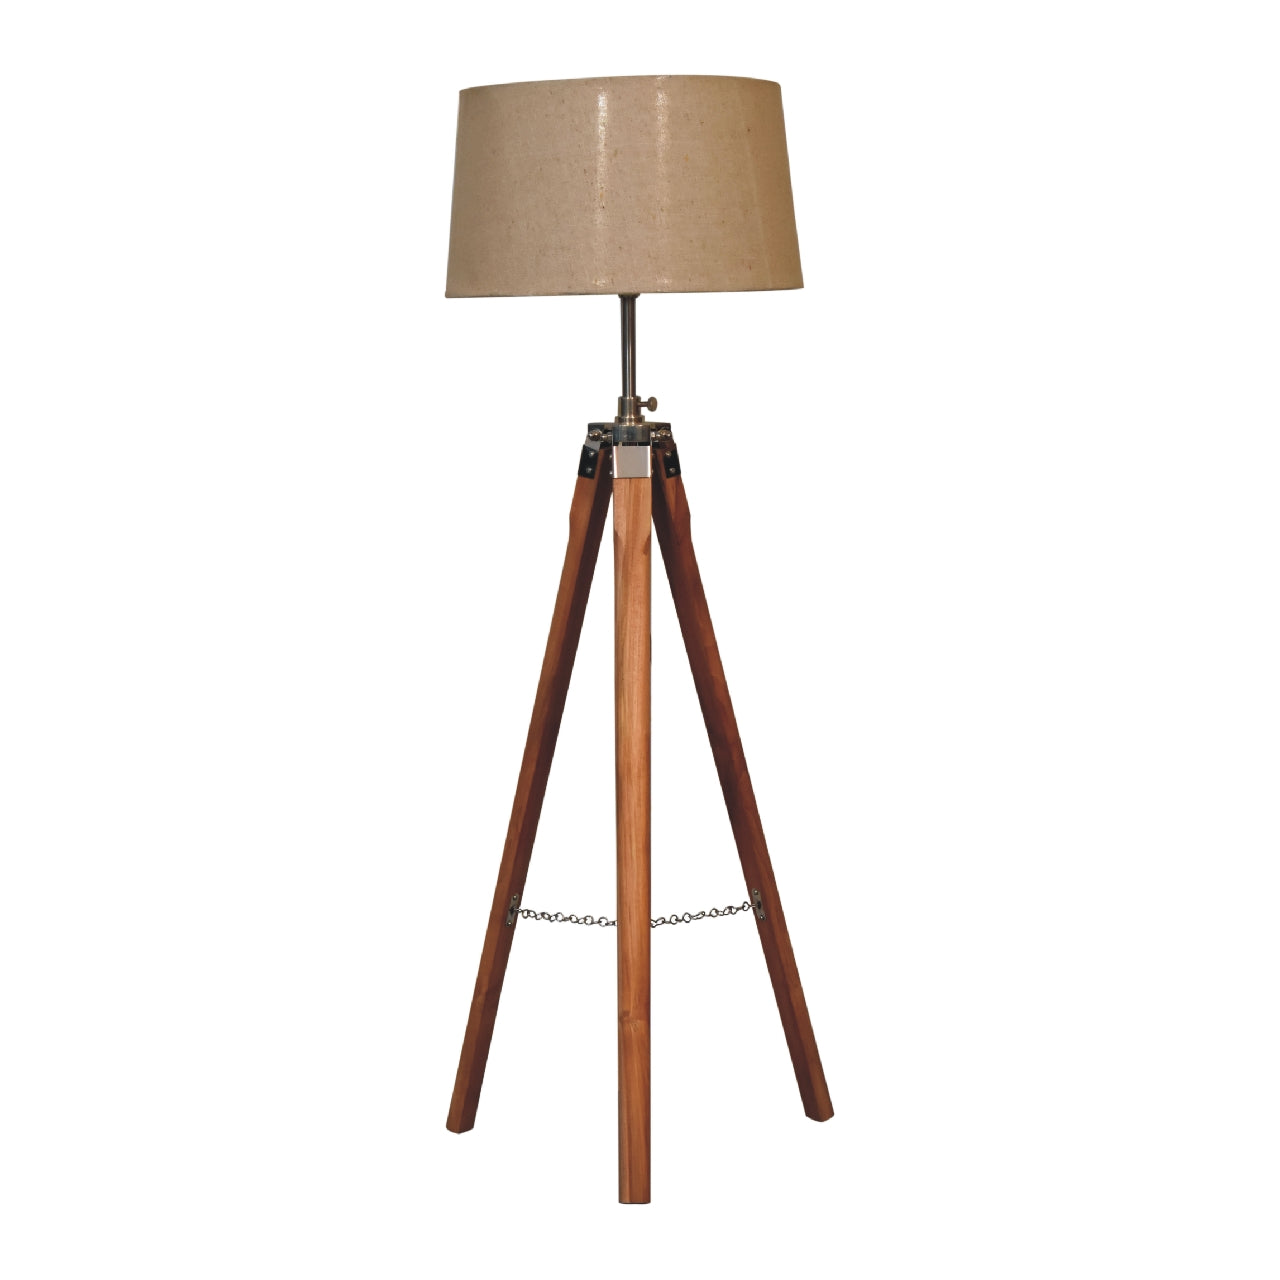 View Fixed Chrome Tripod Floor Lamp information